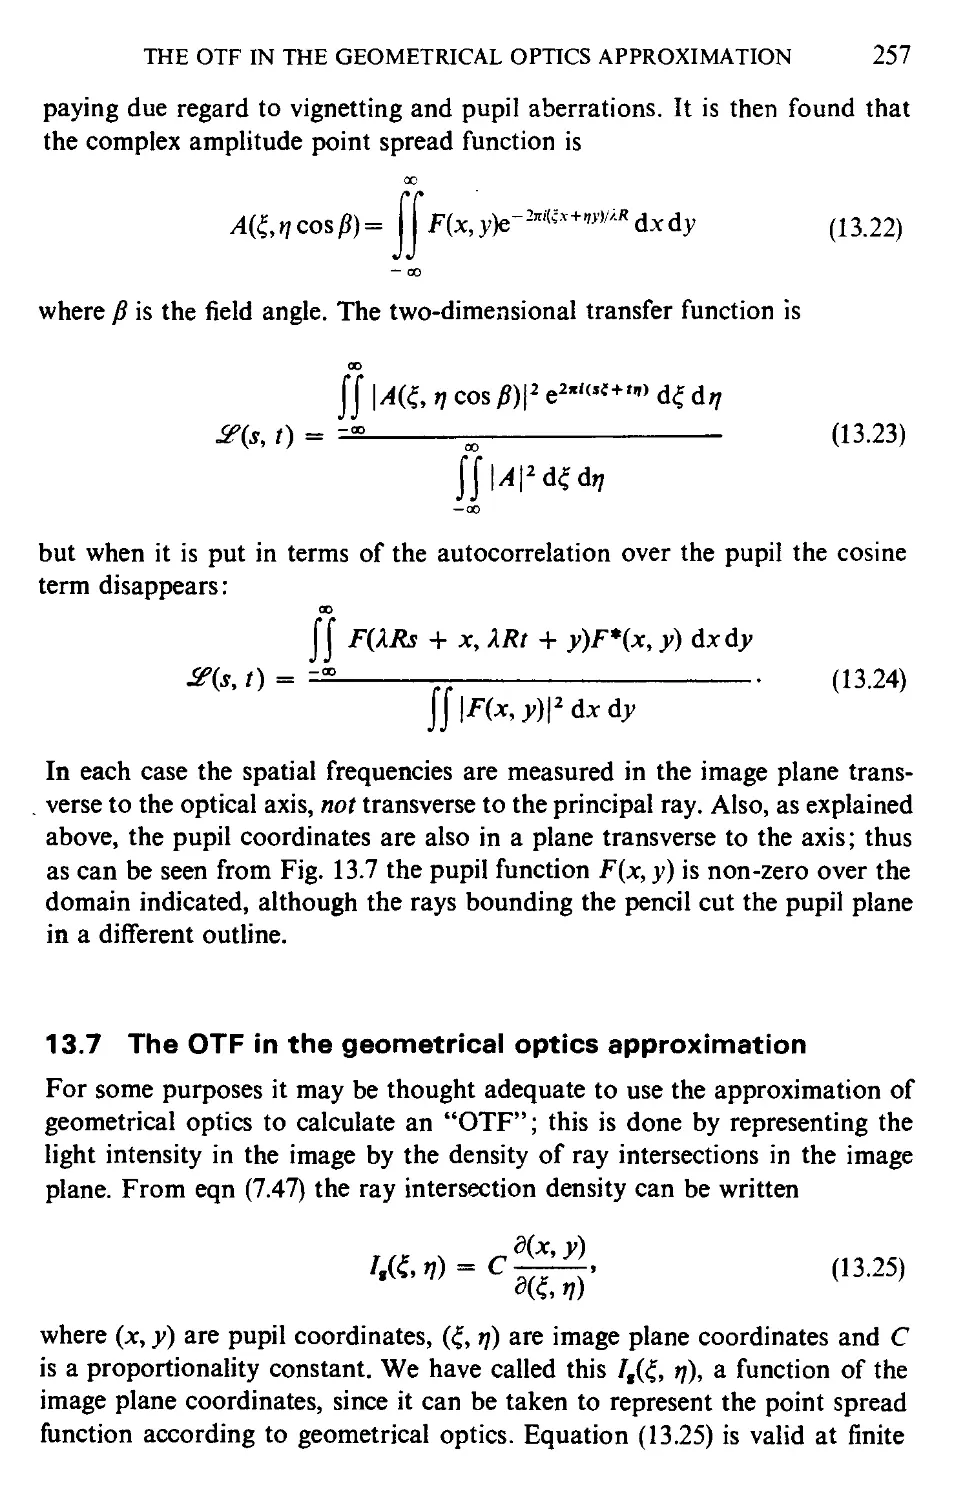 13.7 The OTF in the geometrical optics approximation